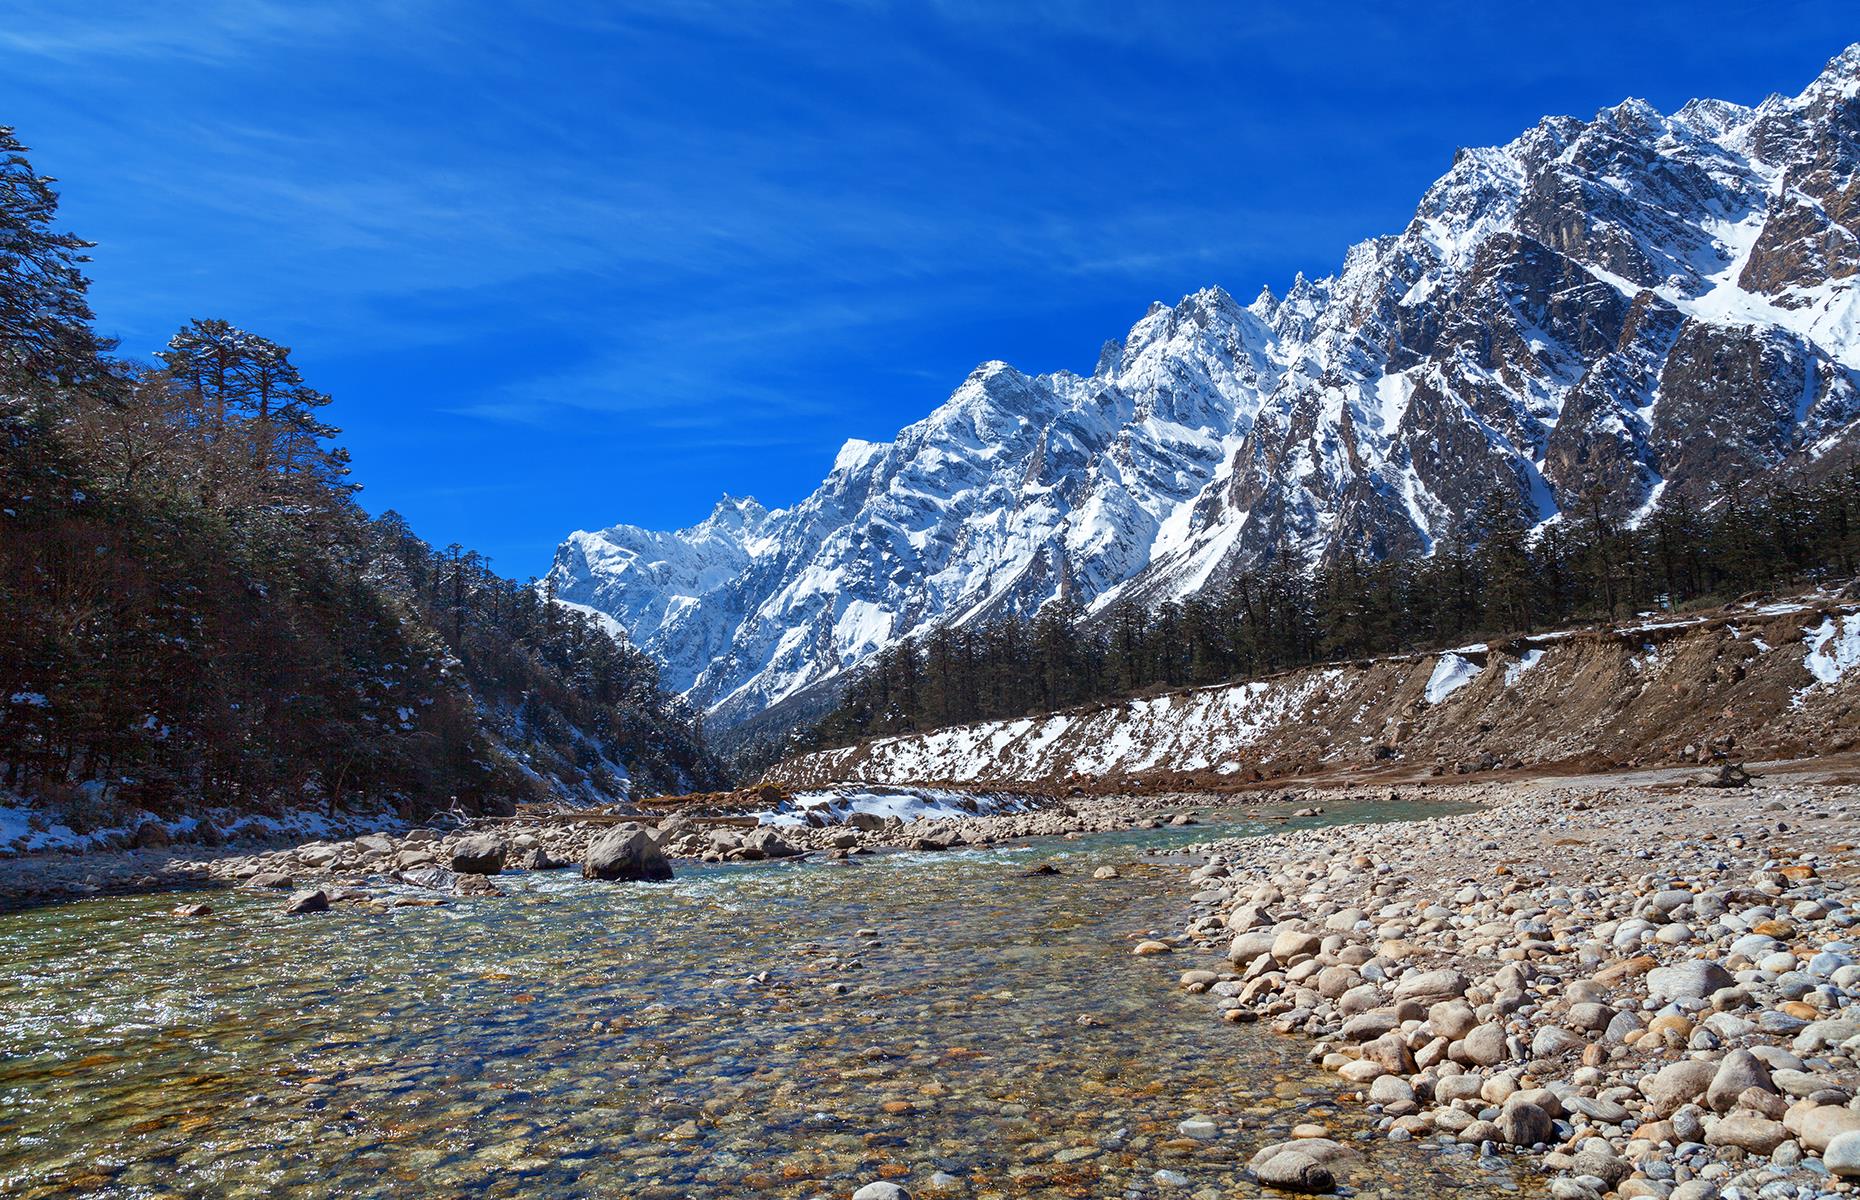 <p>Crafted by the winding Teesta River, the Yumthang Valley in far northern India is a mountain paradise. Expect green grassy riverbanks, forested mountainsides, and yaks grazing by the water in this Himalayan beauty.</p>  <p>A nature reserve spreads east of the river and is famous for its gorgeous wildflowers, sweeping grasslands, and a rhododendron sanctuary with over 40 trees.</p>